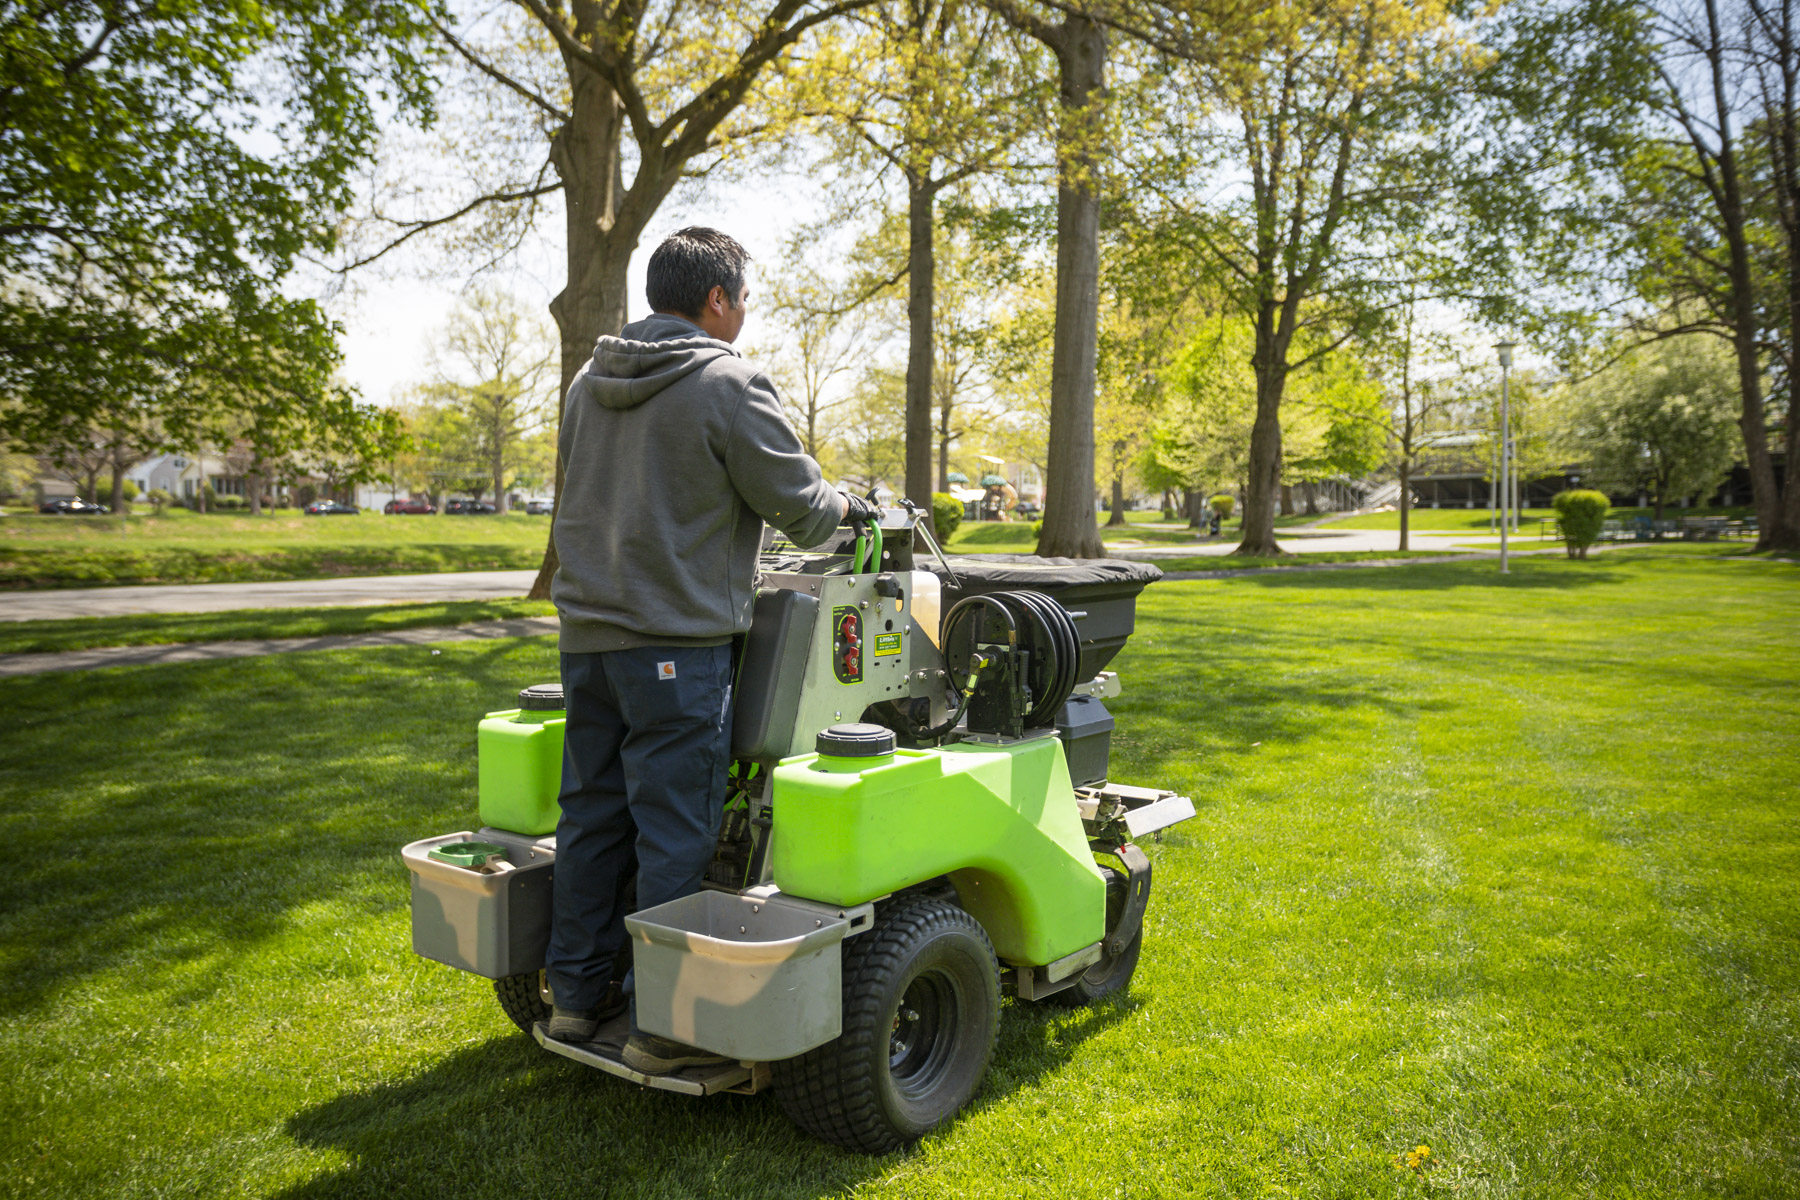 Lawn care service treating lawn